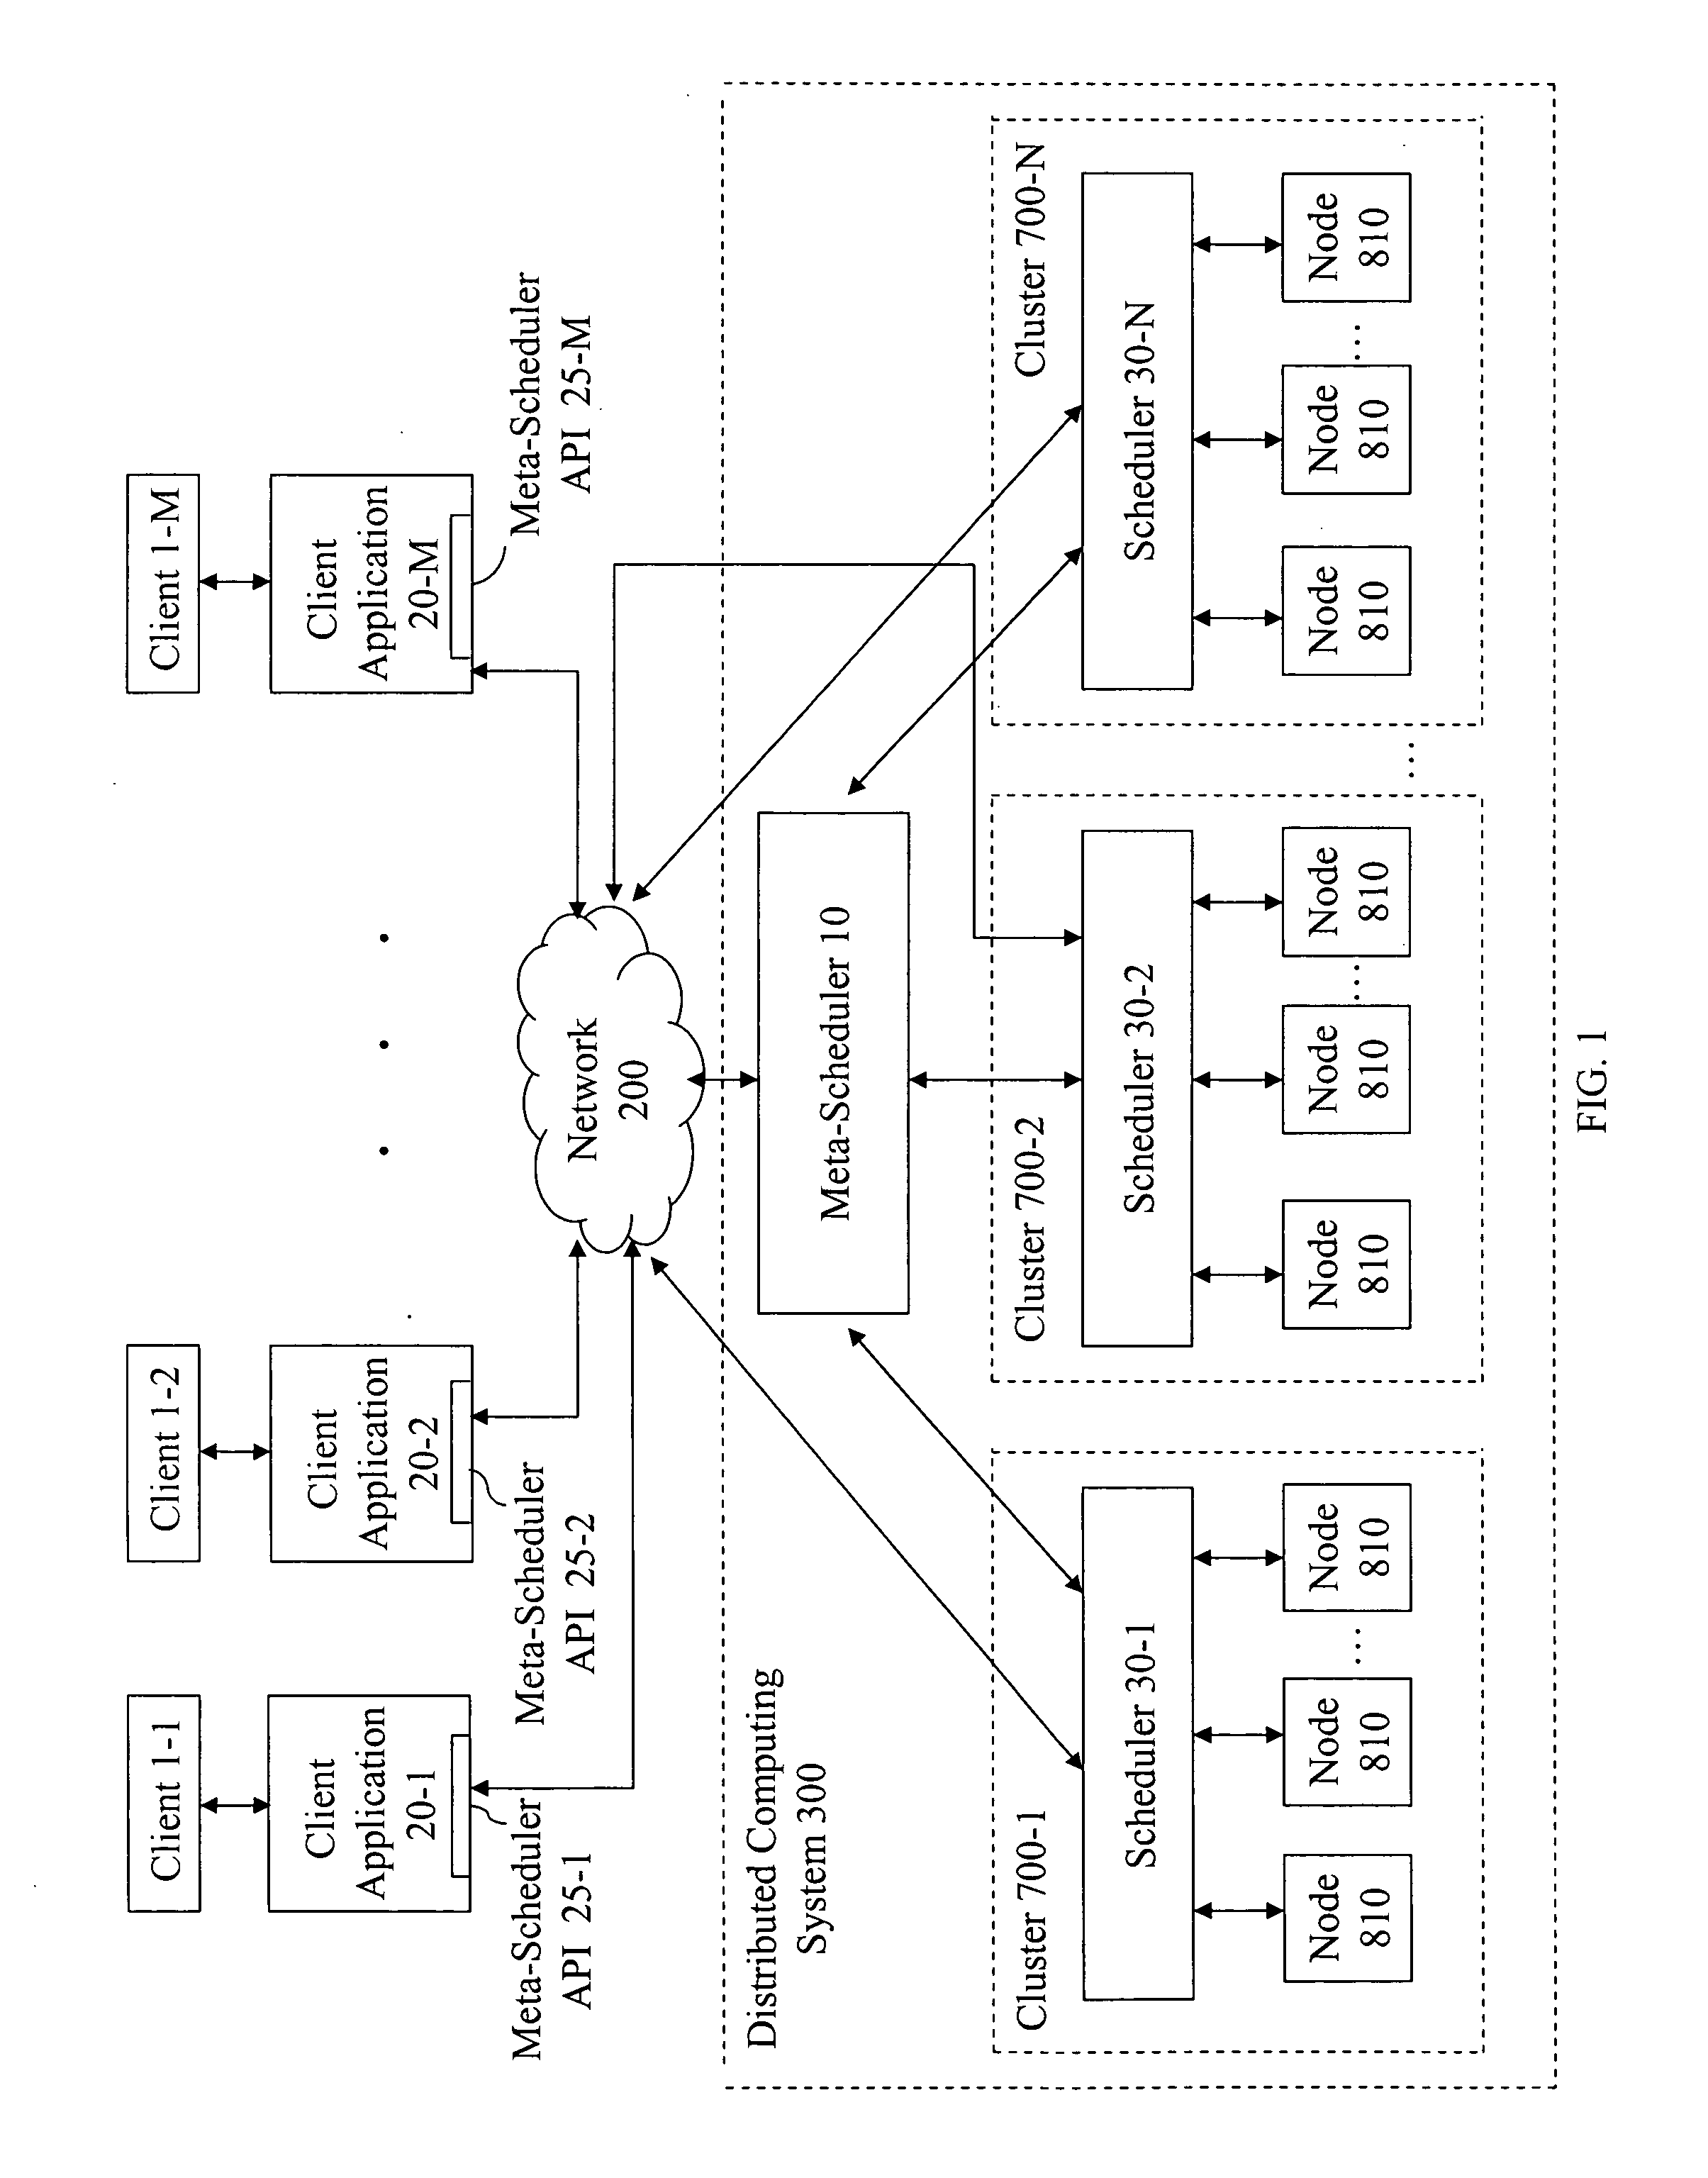 System and method for meta-scheduling